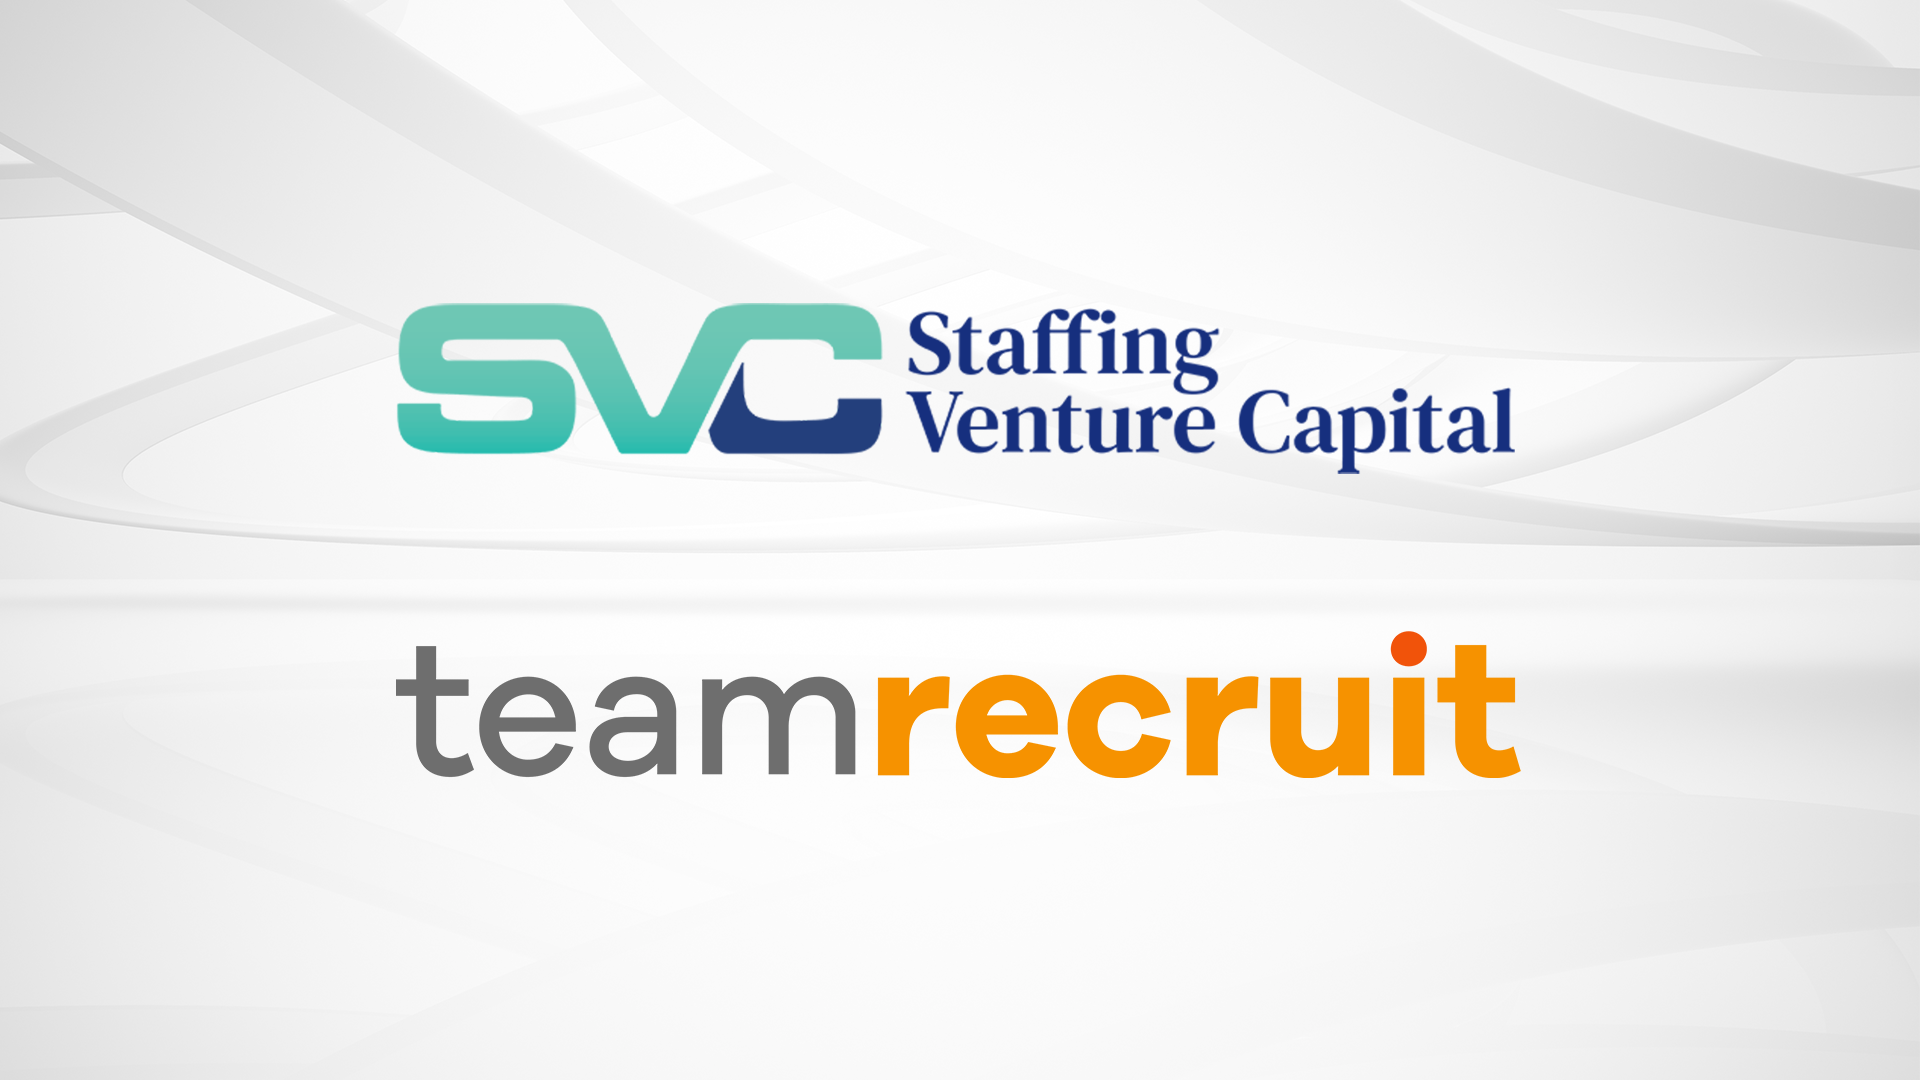 Featured image for “Staffing Venture Capital has launched its Staffing & Recruiting division, TeamRecruit”